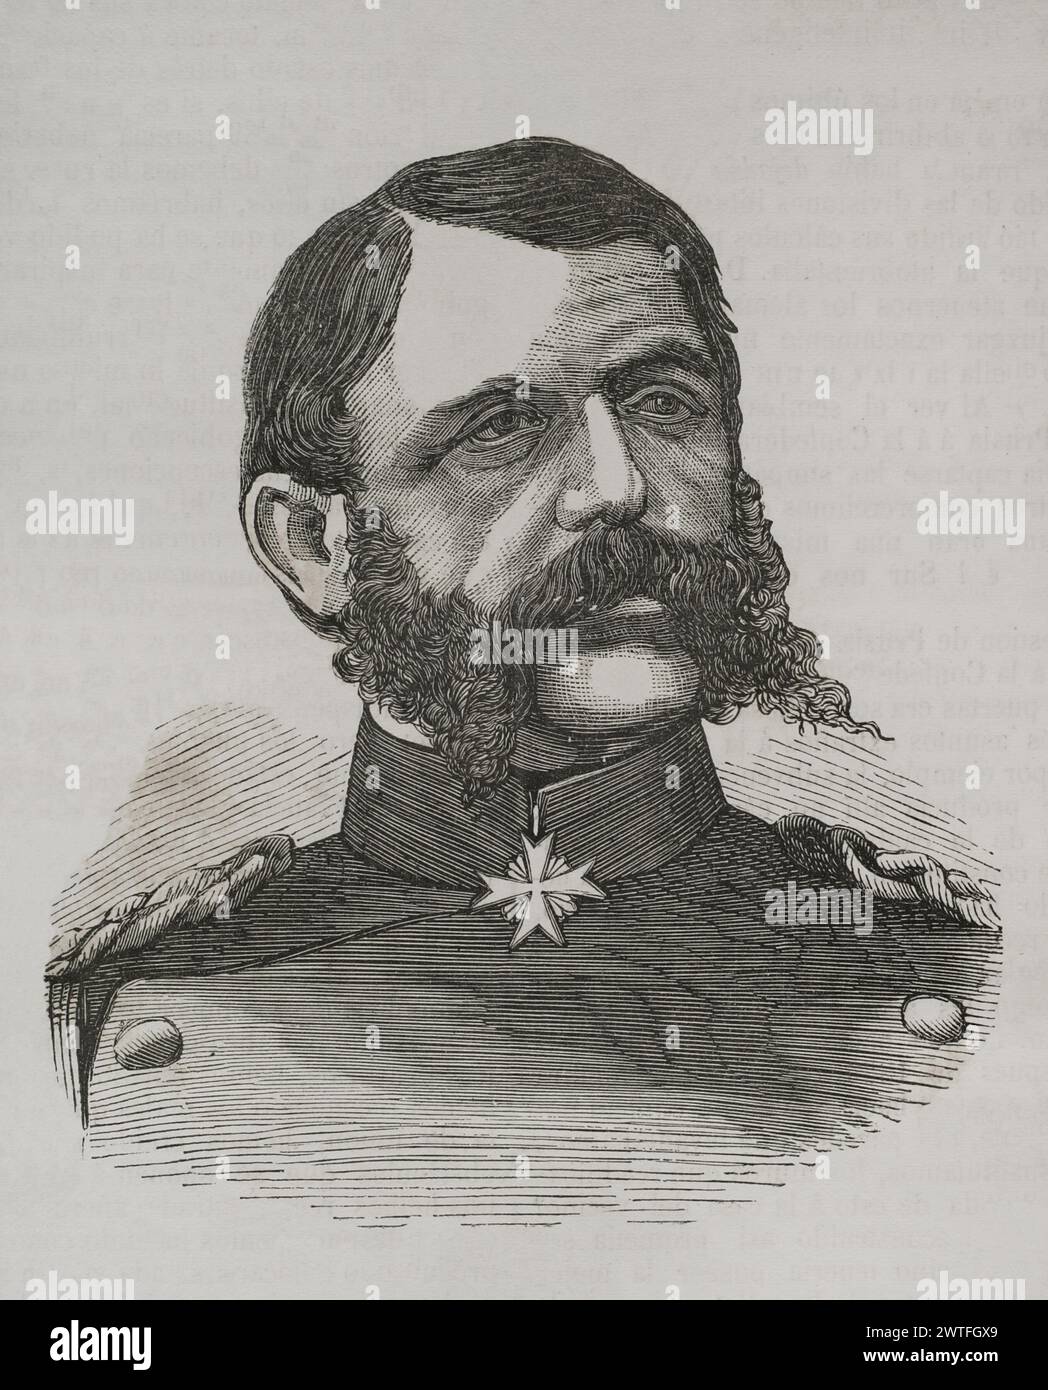 Theophil von Podbielski (1814-1879). General of the Prussian Army. Portrait. Engraving. 'Historia de la Guerra de Francia y Prusia' (History of the War between France and Prussia). Volume II. Published in Barcelona, 1871. Stock Photo